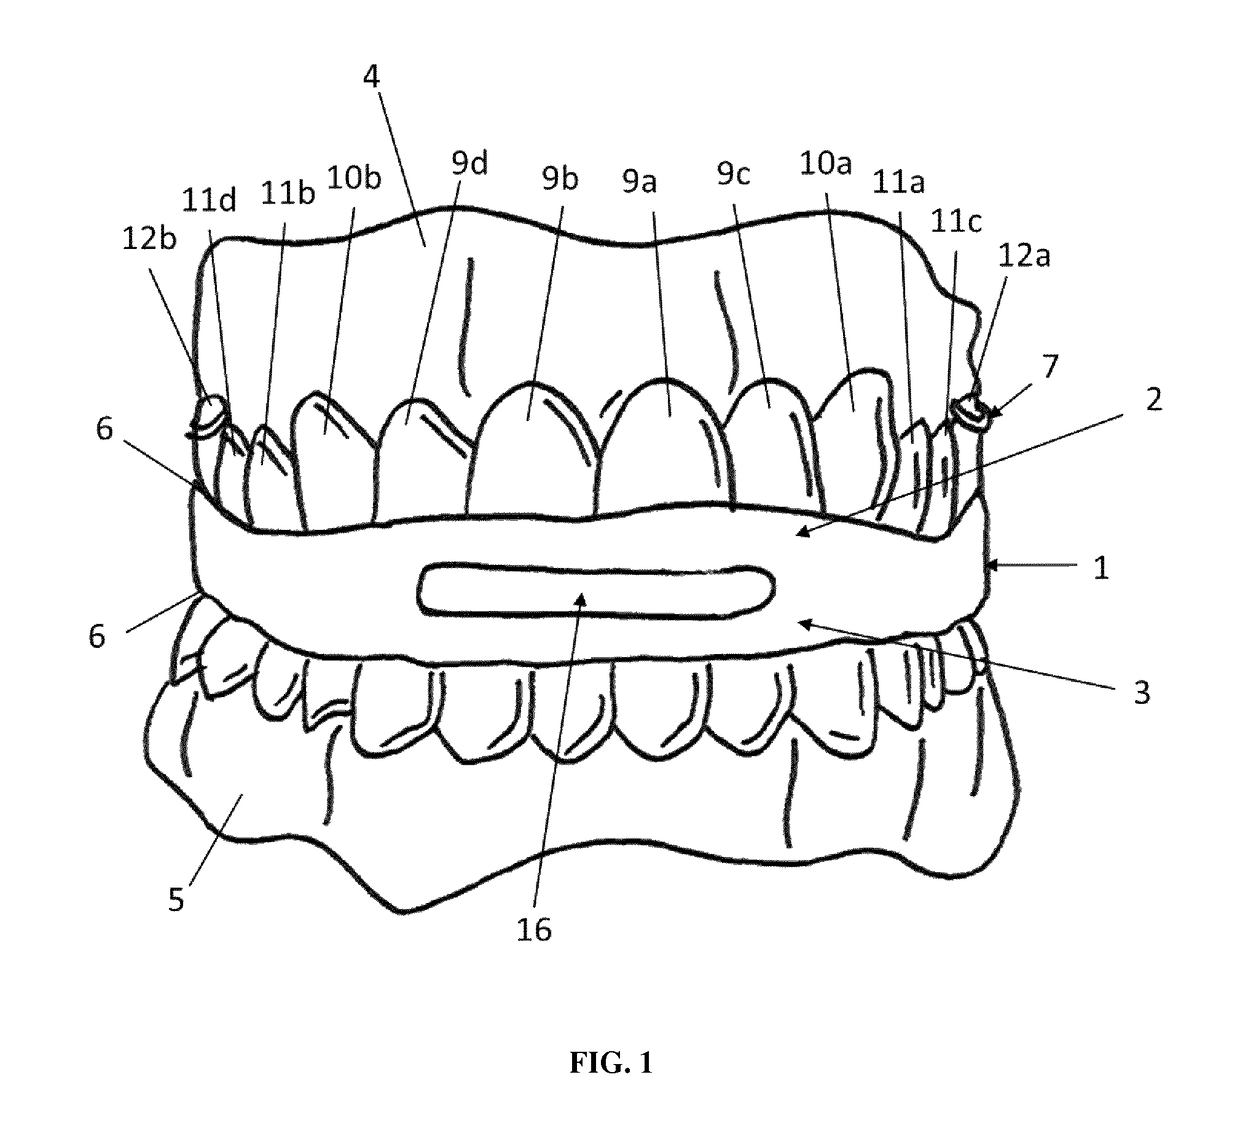 Intraoral functional device for relieving obstructive sleep apnea syndrom, snoring and/or other airway disorders